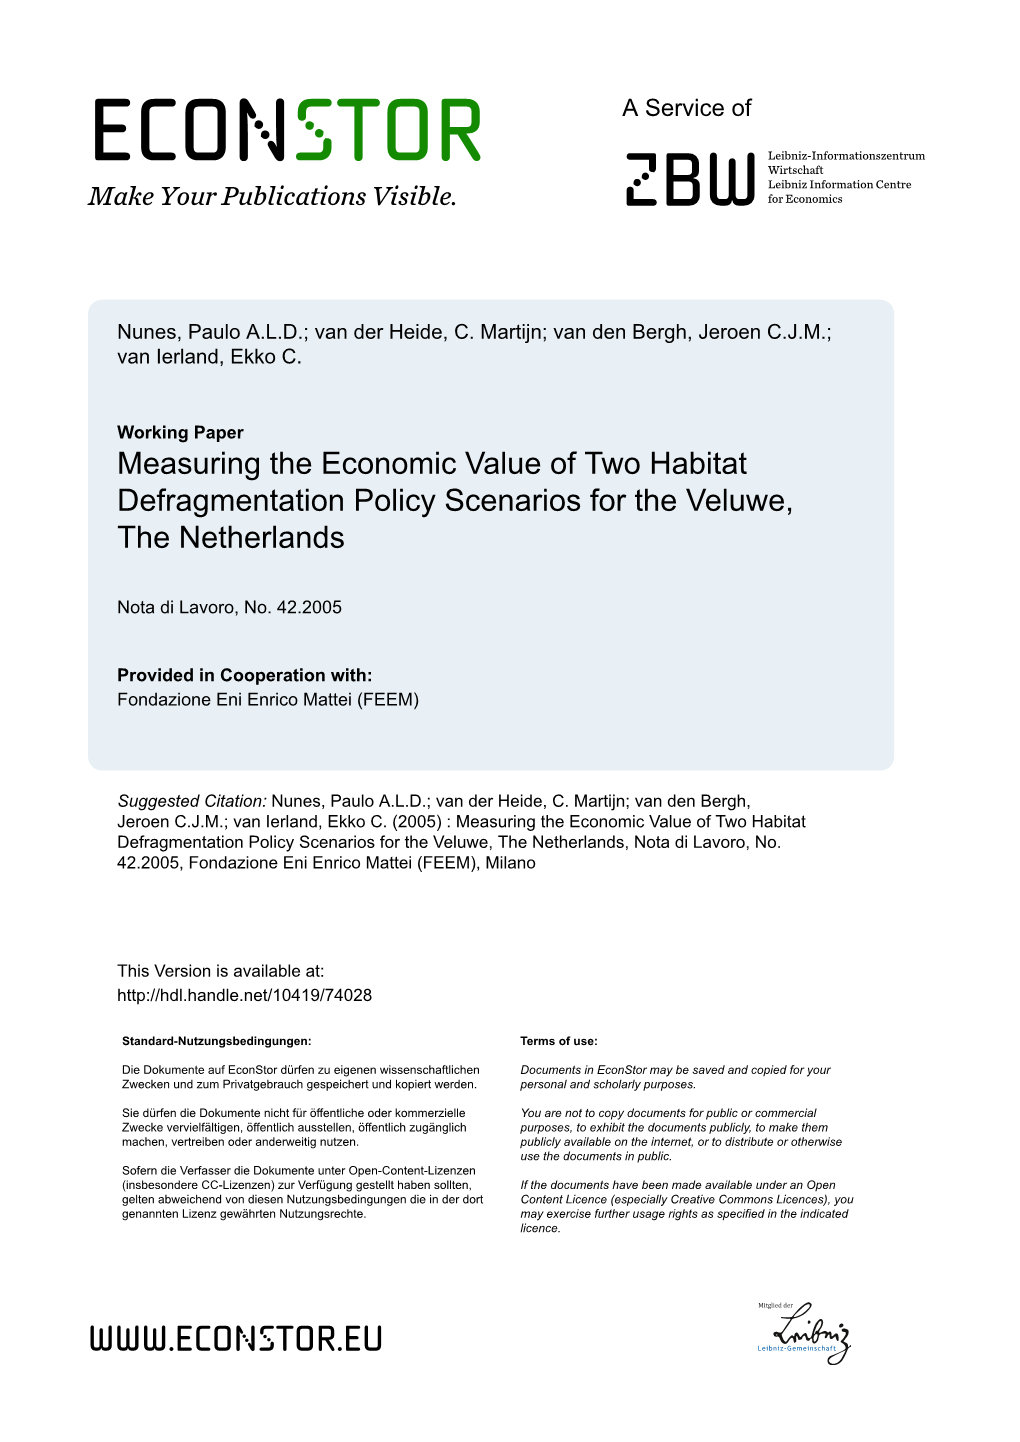 Measuring the Economic Value of Two Habitat Defragmentation Policy Scenarios for the Veluwe, the Netherlands